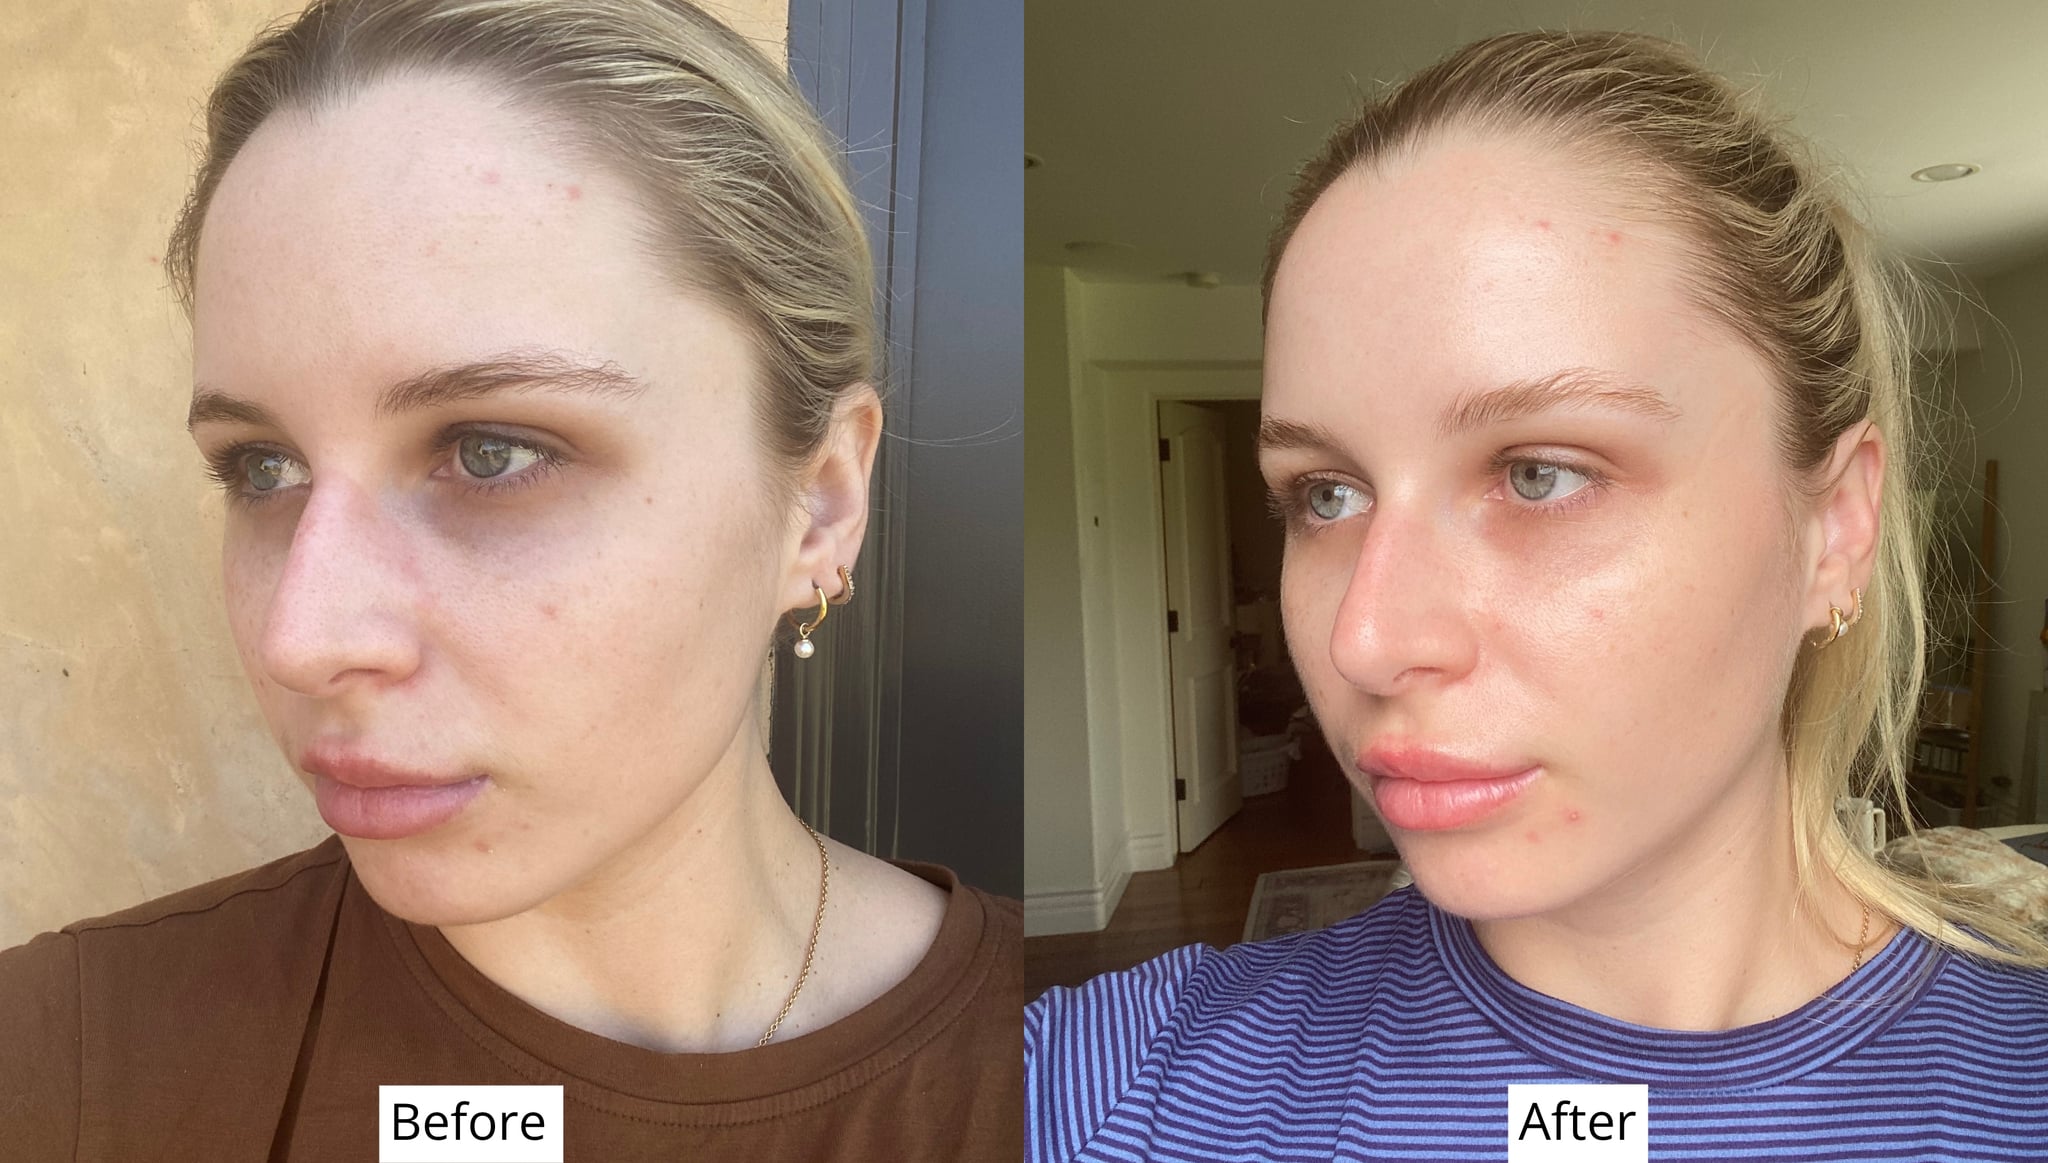 Before and after using CosRx blemish treatment serum